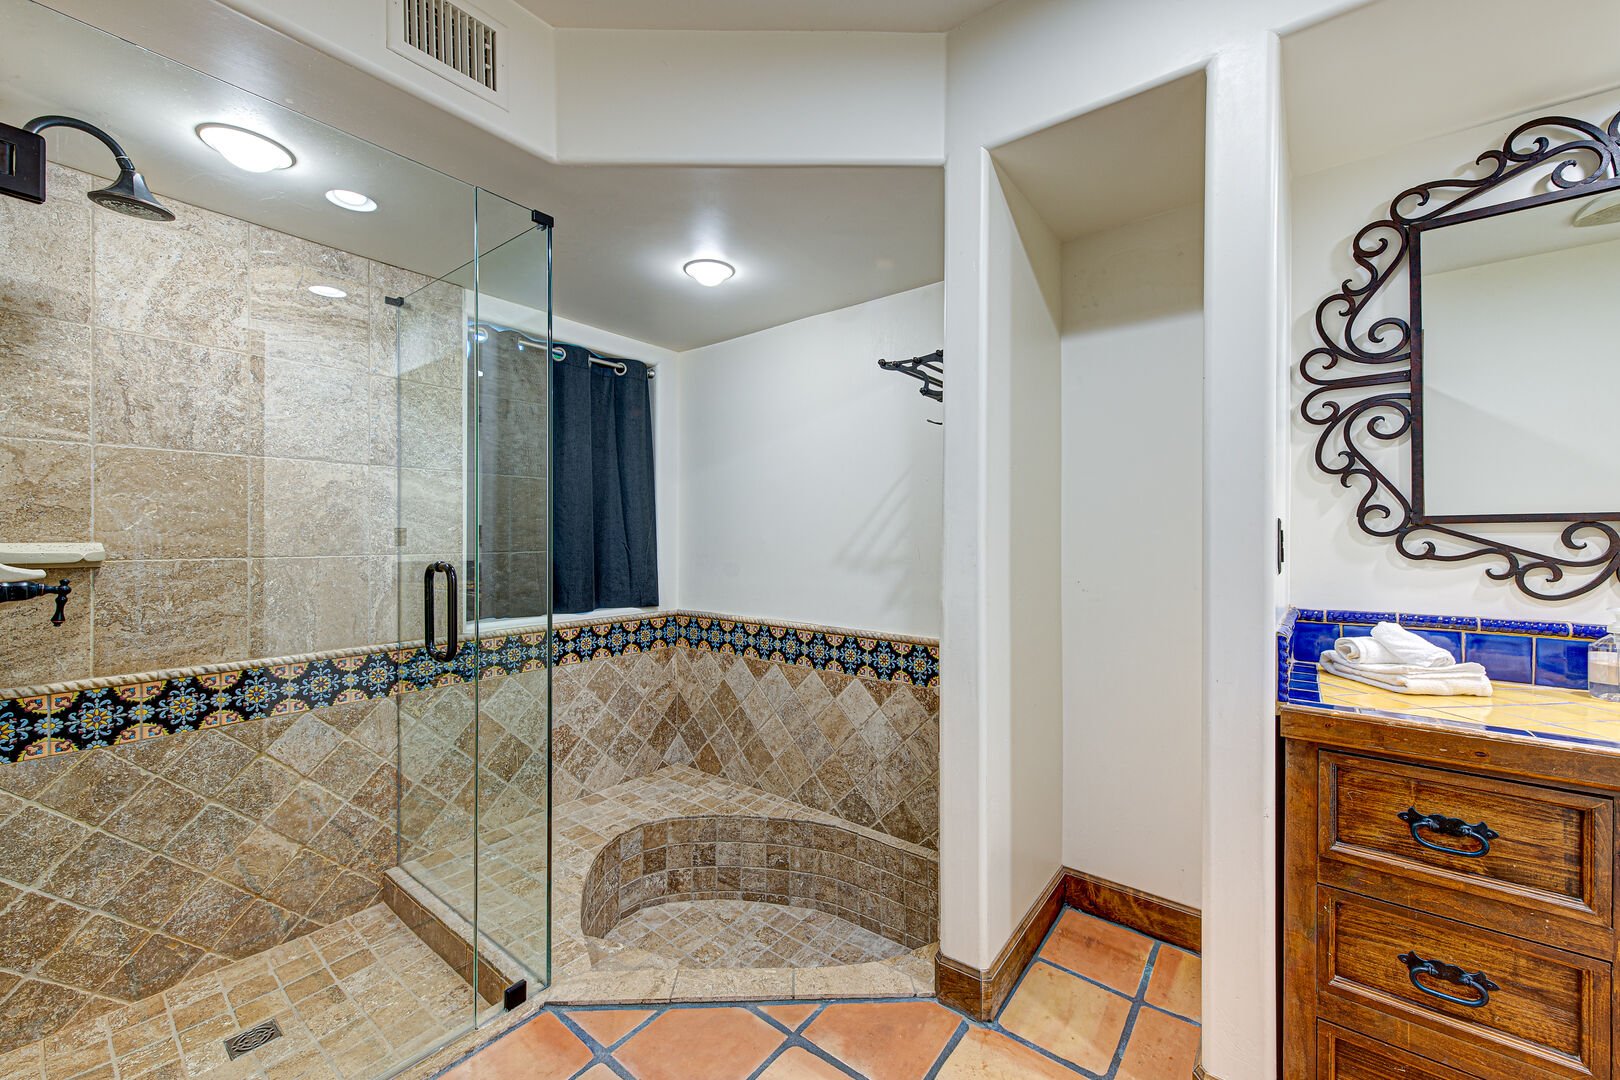 Experience pure indulgence in the Suite 8 bathroom at Casa Palacio.